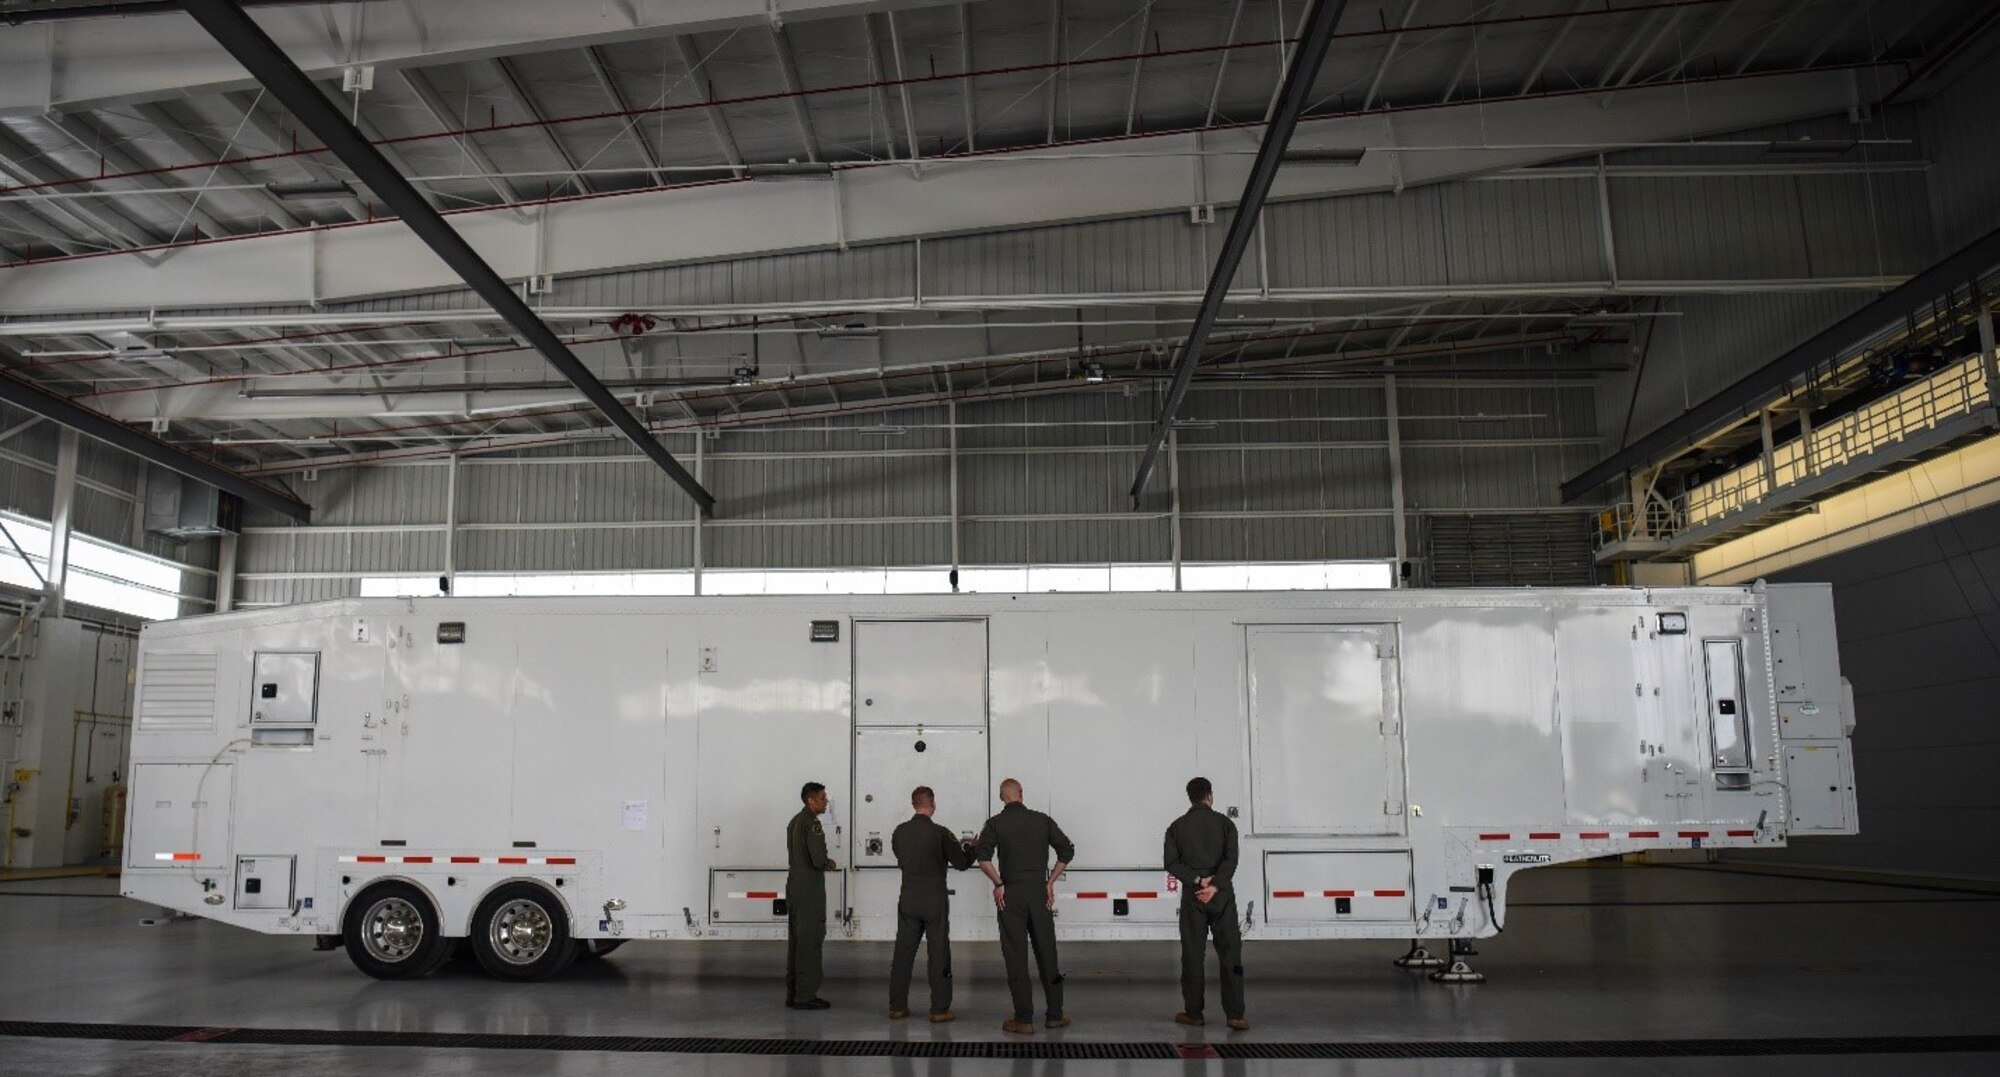 Four men stand in front of a large trailer in side a hanger.